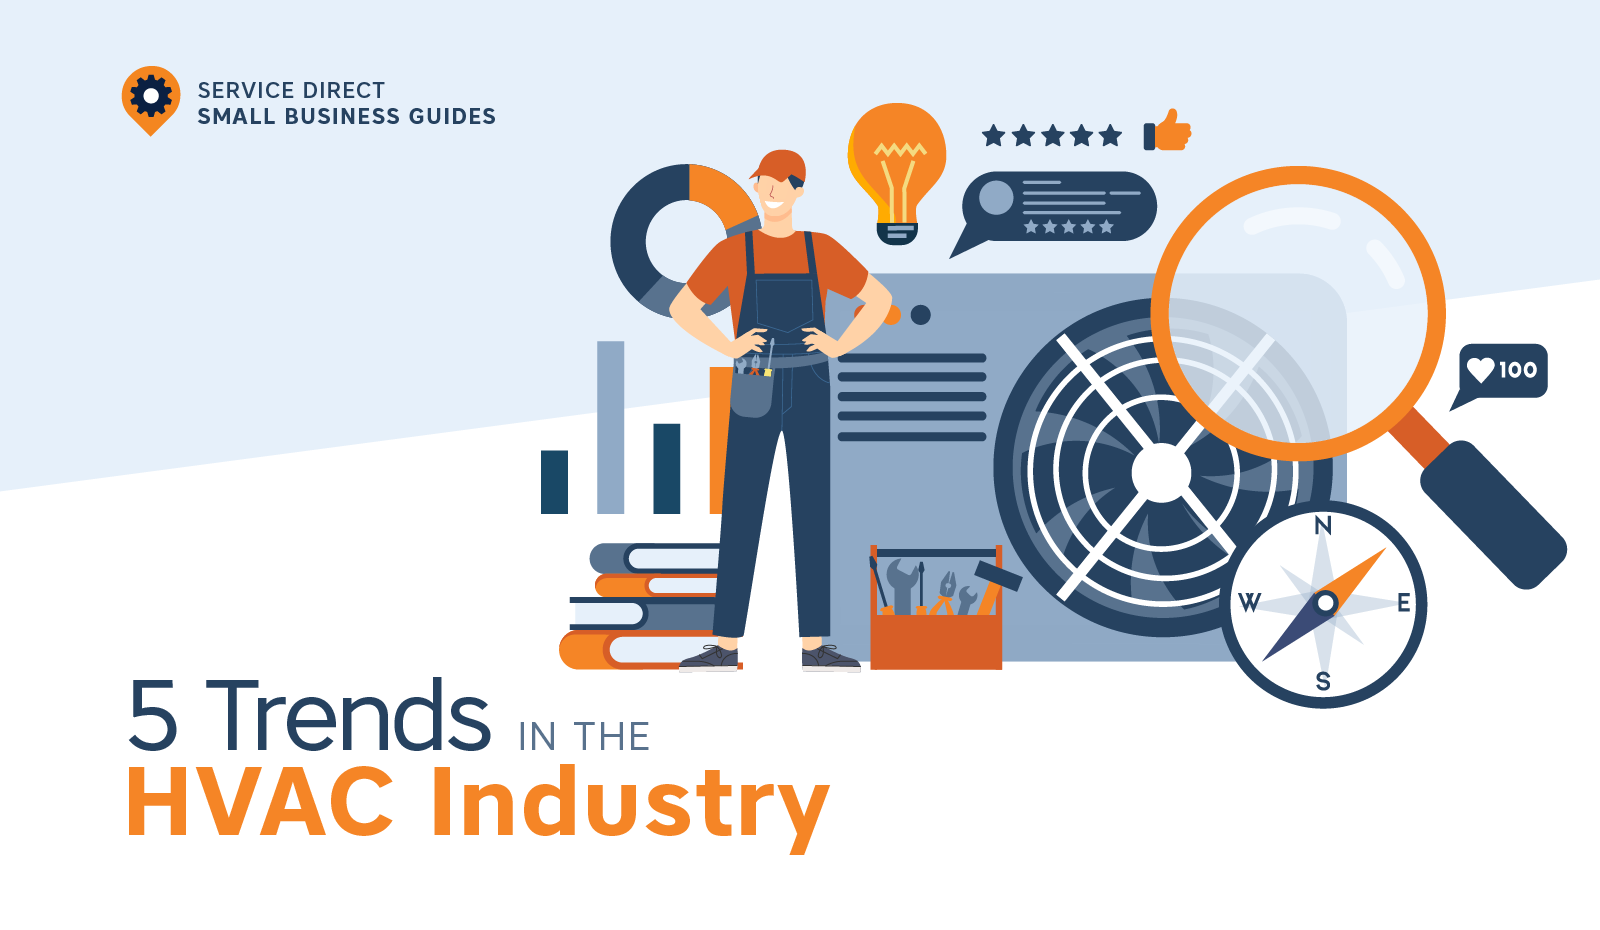 5 Top Trends in the HVAC Industry You Need to Know About